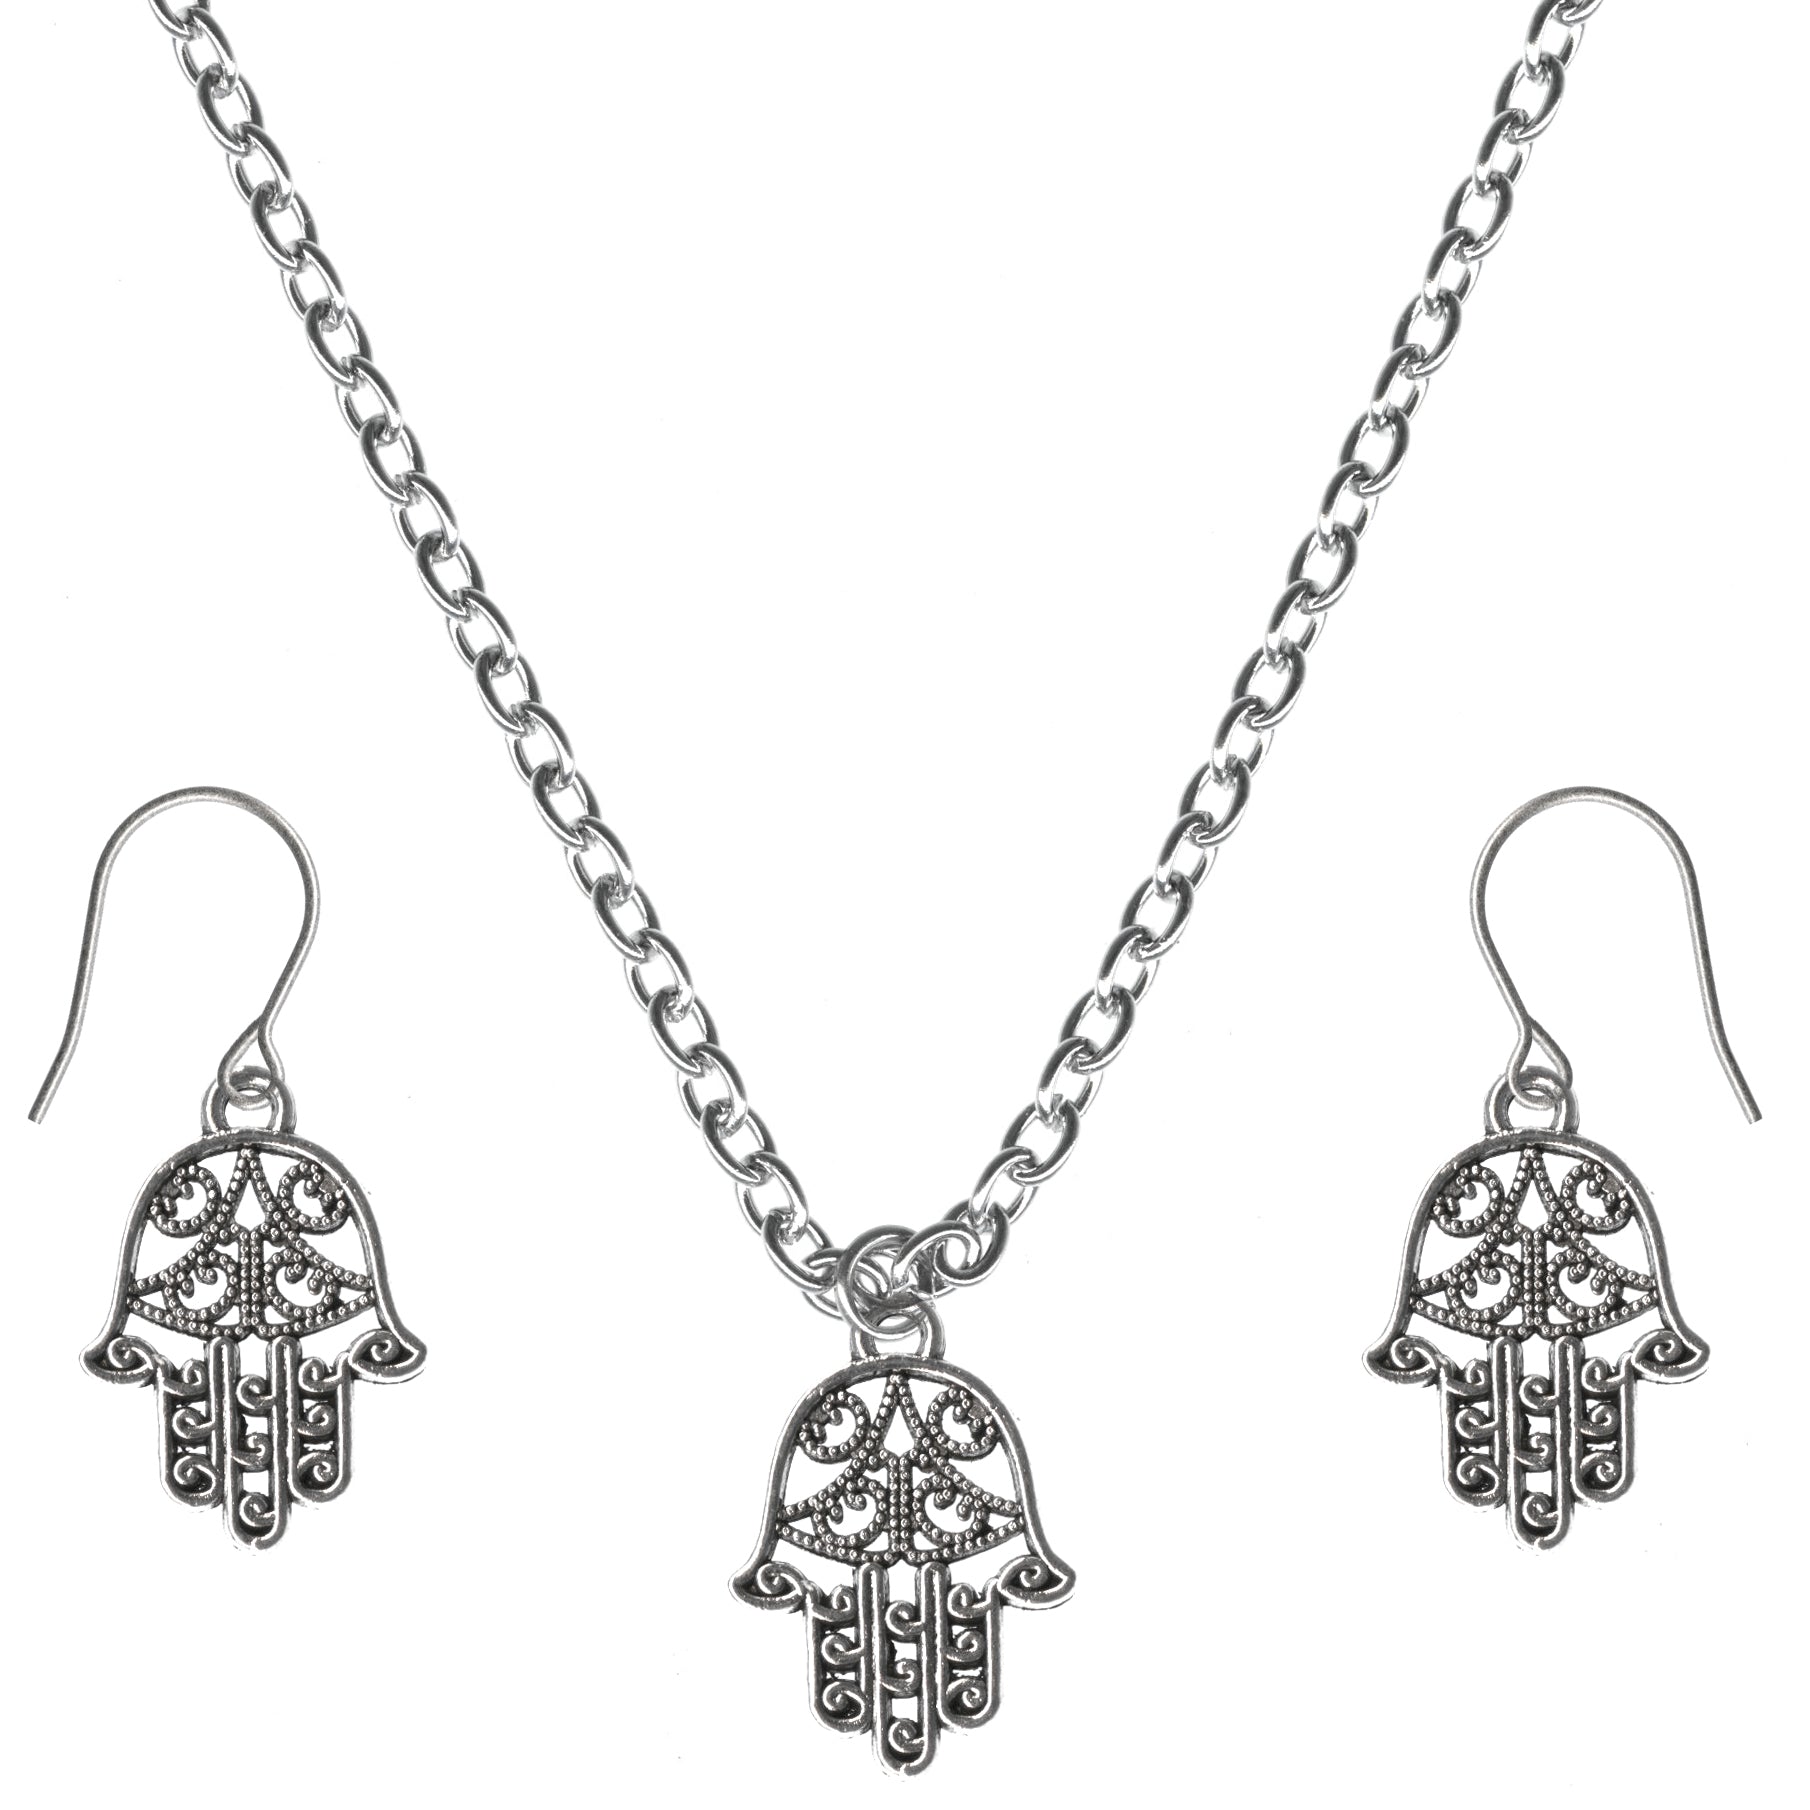 Lucky Protection Filigree Hamsa Charm Steel Chain Necklace and Hypoallergenic Titanium Earrings Set